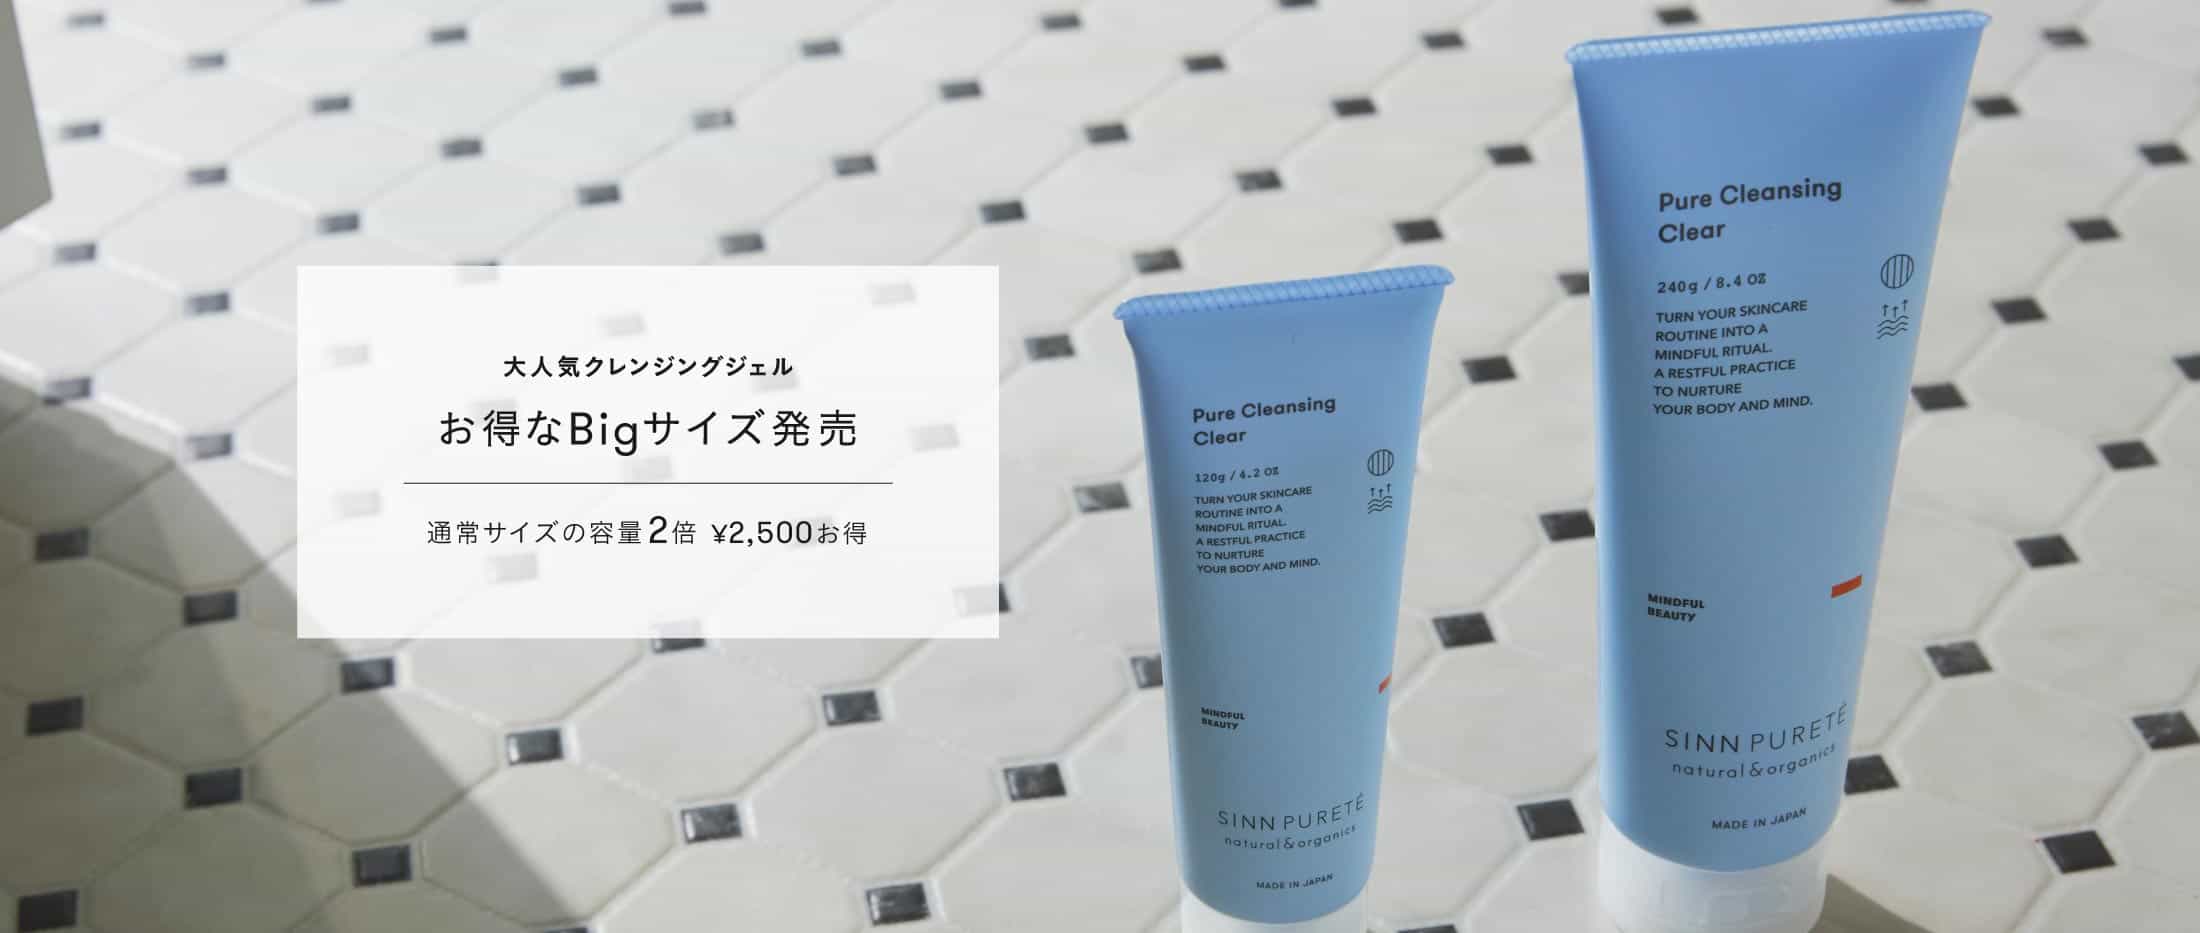 Pure Cleansing Clear Big